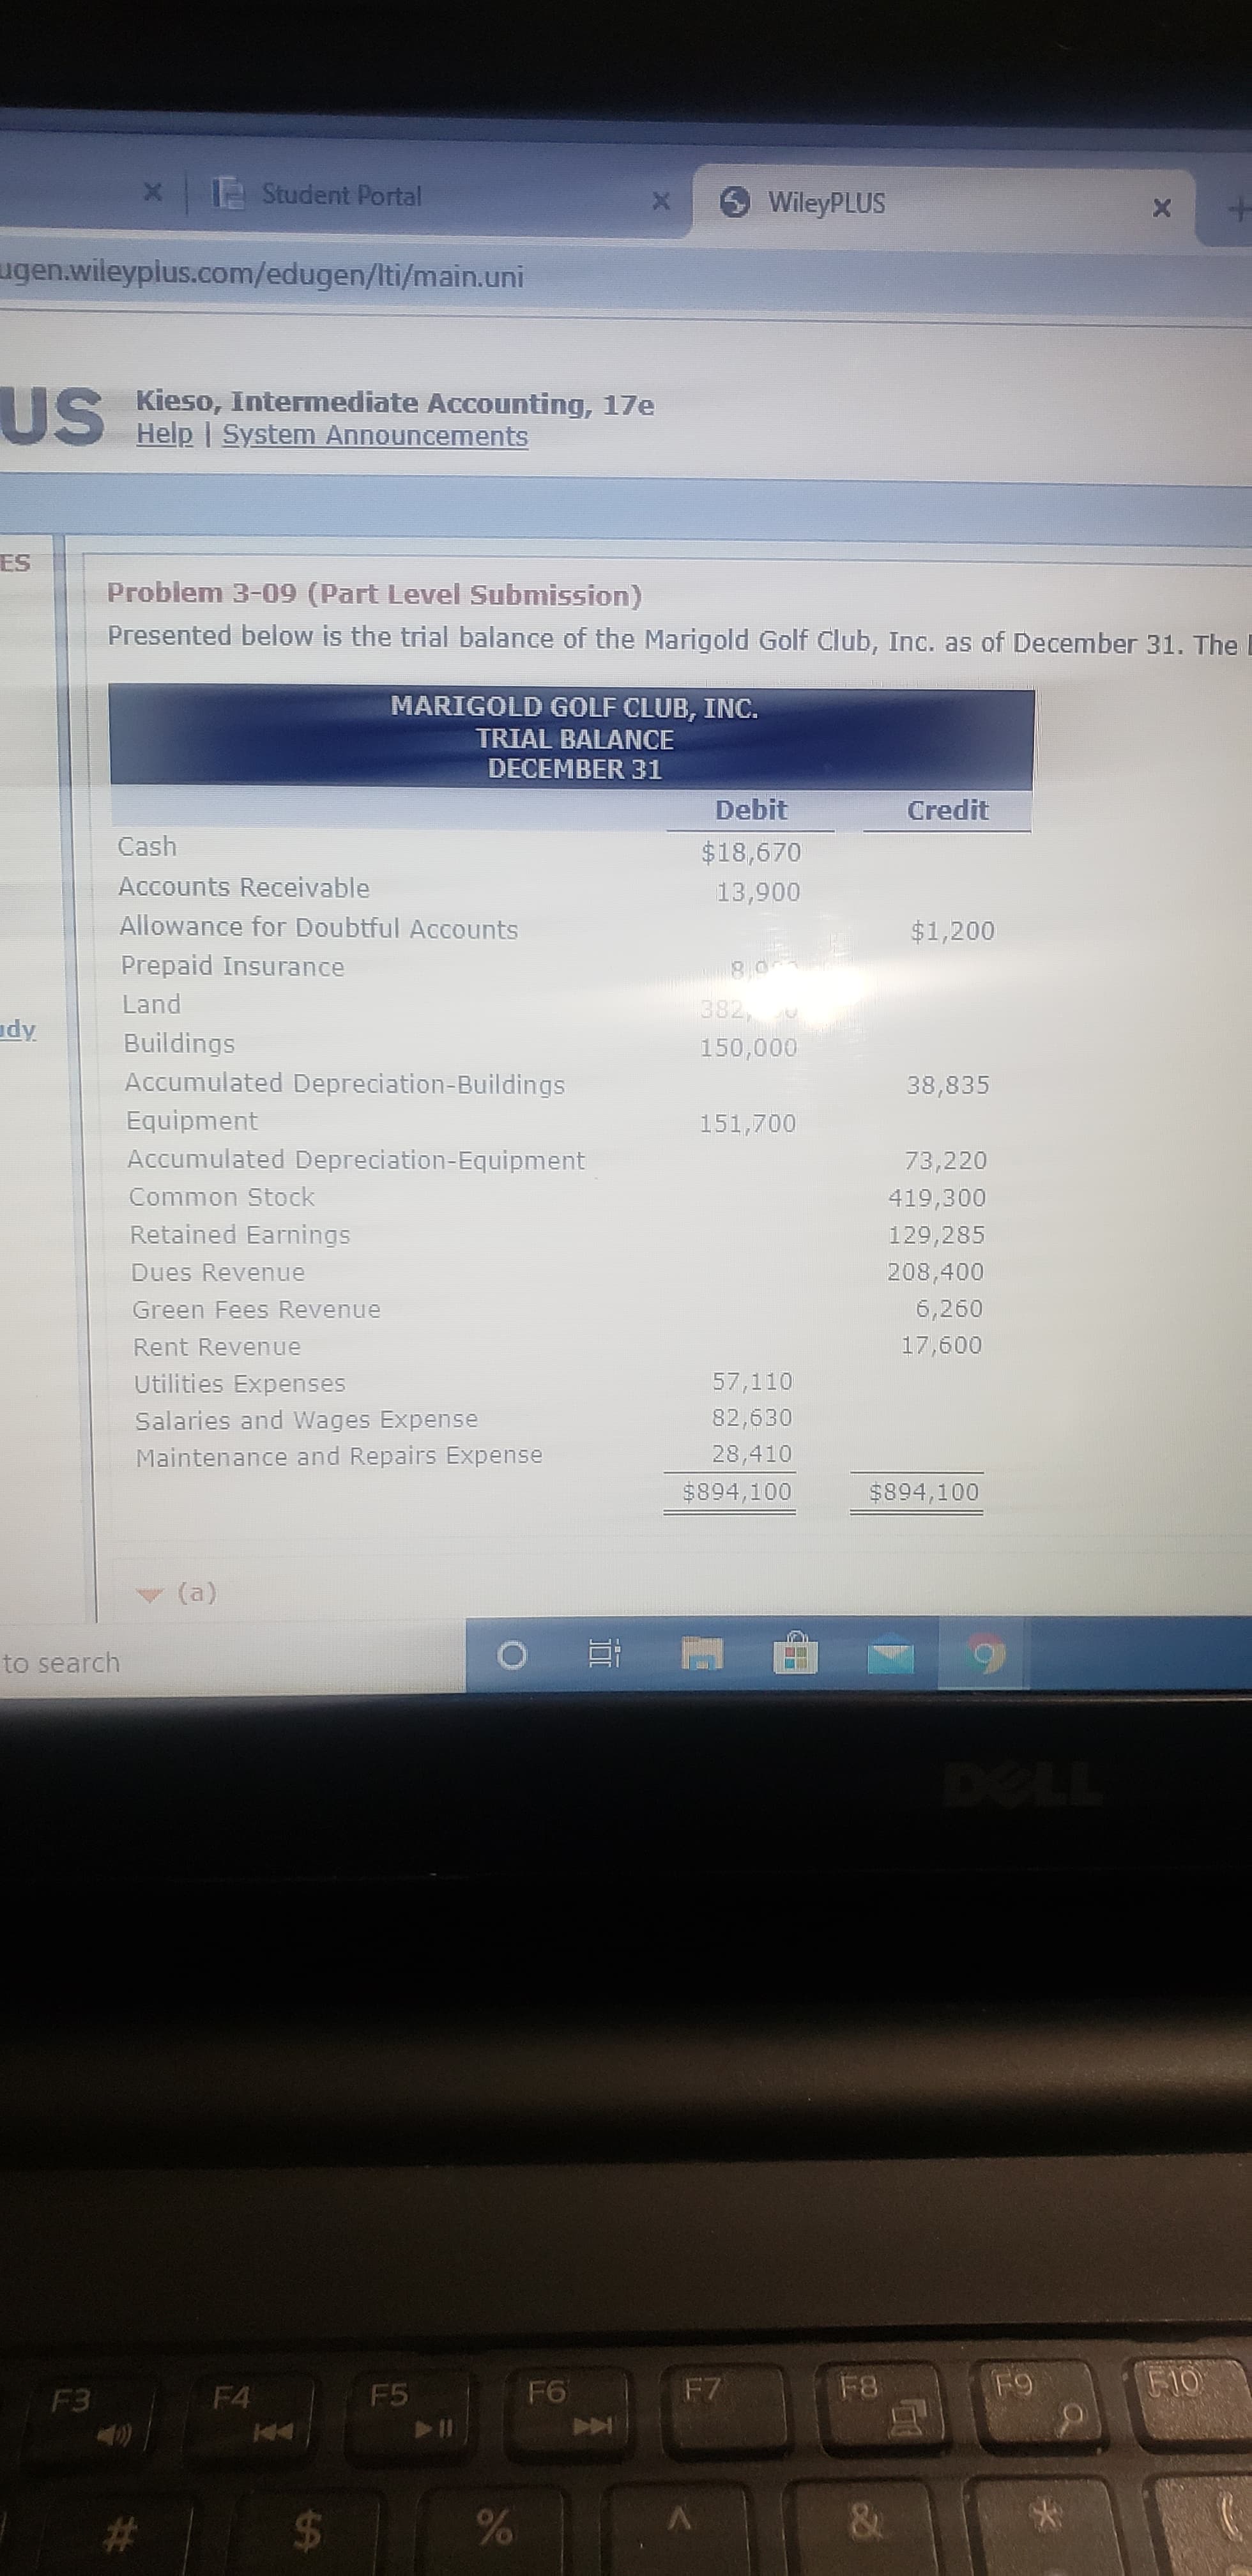 x 12 Student Portal
O WileyPLUS
ugen.wileypius.com/edugen/Iti/main.uni
US
Kieso, Intermediate Accounting, 17e
Help | System Announcements
ES
Problem 3-09 (Part Level Submission)
Presented below is the trial balance of the Marigold Golf Club, Inc. as of December 31. The
MARIGOLD GOLF CLUB, INC.
TRIAL BALANCE
DECEMBER 31
Debit
Credit
Cash
$18,670
Accounts Receivable
13,900
Allowance for Doubtful Accounts
$1,200
Prepaid Insurance
Land
382,
dy
Buildings
150,000
Accumulated Depreciation-Buildings
38,835
Equipment
151,700
Accumulated Depreciation-Equipment
73,220
Common Stock
419,300
Retained Earnings
129,285
Dues Revenue
208,400
Green Fees Revenue
6,260
Rent Revenue
17,600
Utilities Expenses
57,110
Salaries and Wages Expense
82,630
Maintenance and Repairs Expense
28,410
$894,100
$894,100
(a)
to search
DOLL
F4
F5
F6
F7
F8
F9
F10
F3
#3
$4
&
96
%24
